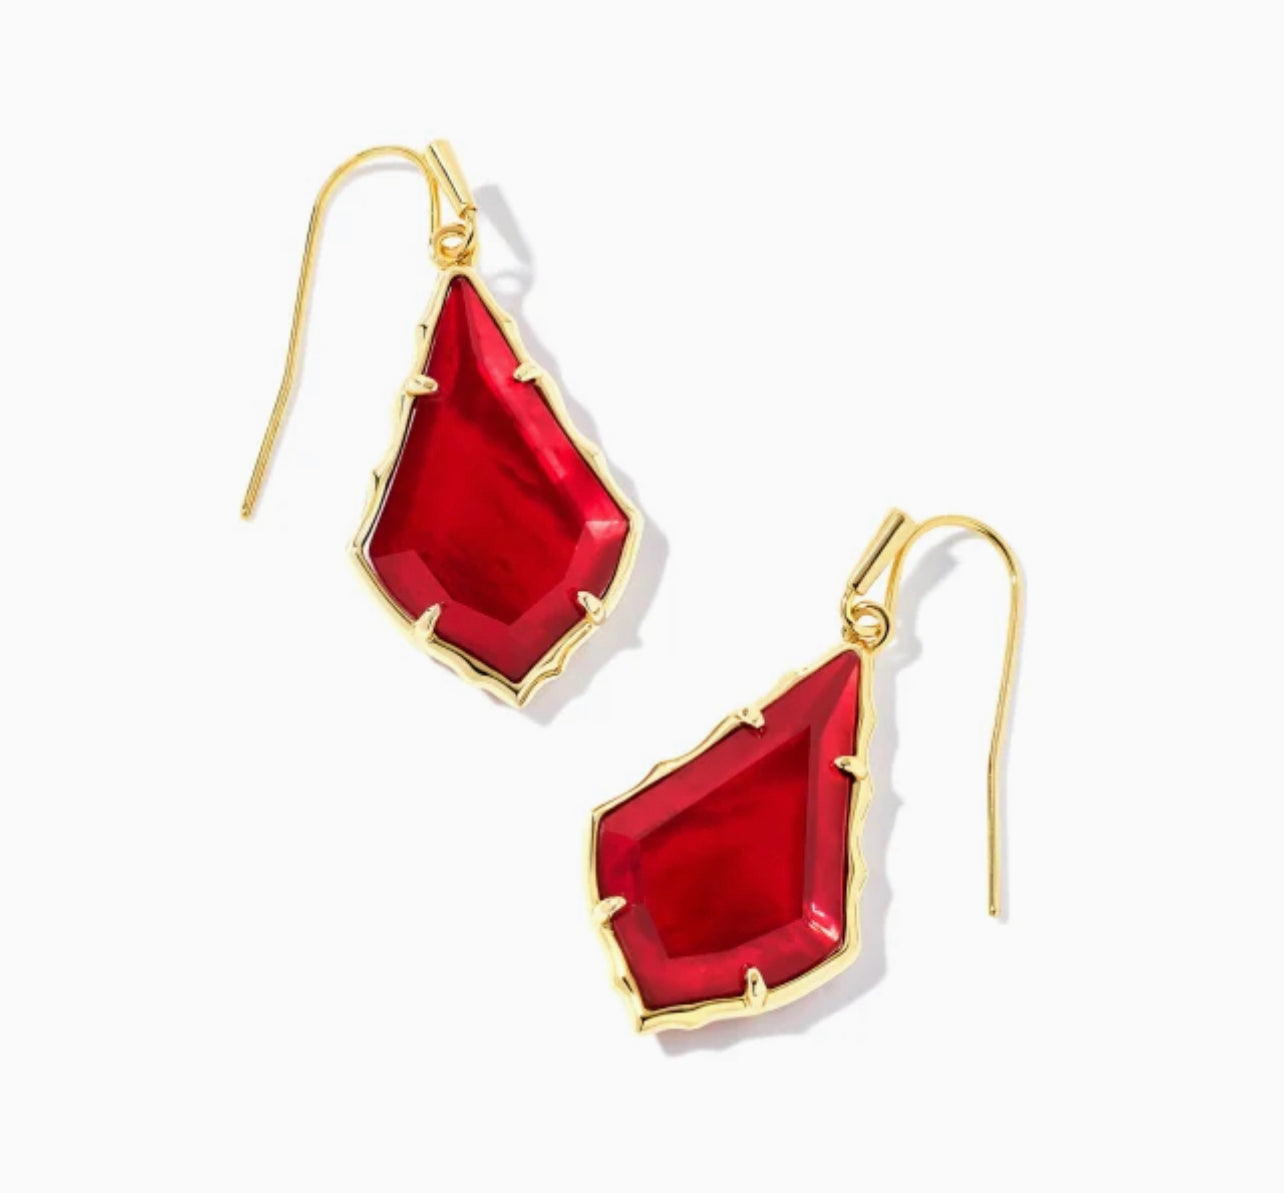 Kendra Scott-Small Faceted Alex Gold Drop Earrings in Cranberry Illusion 9608802903